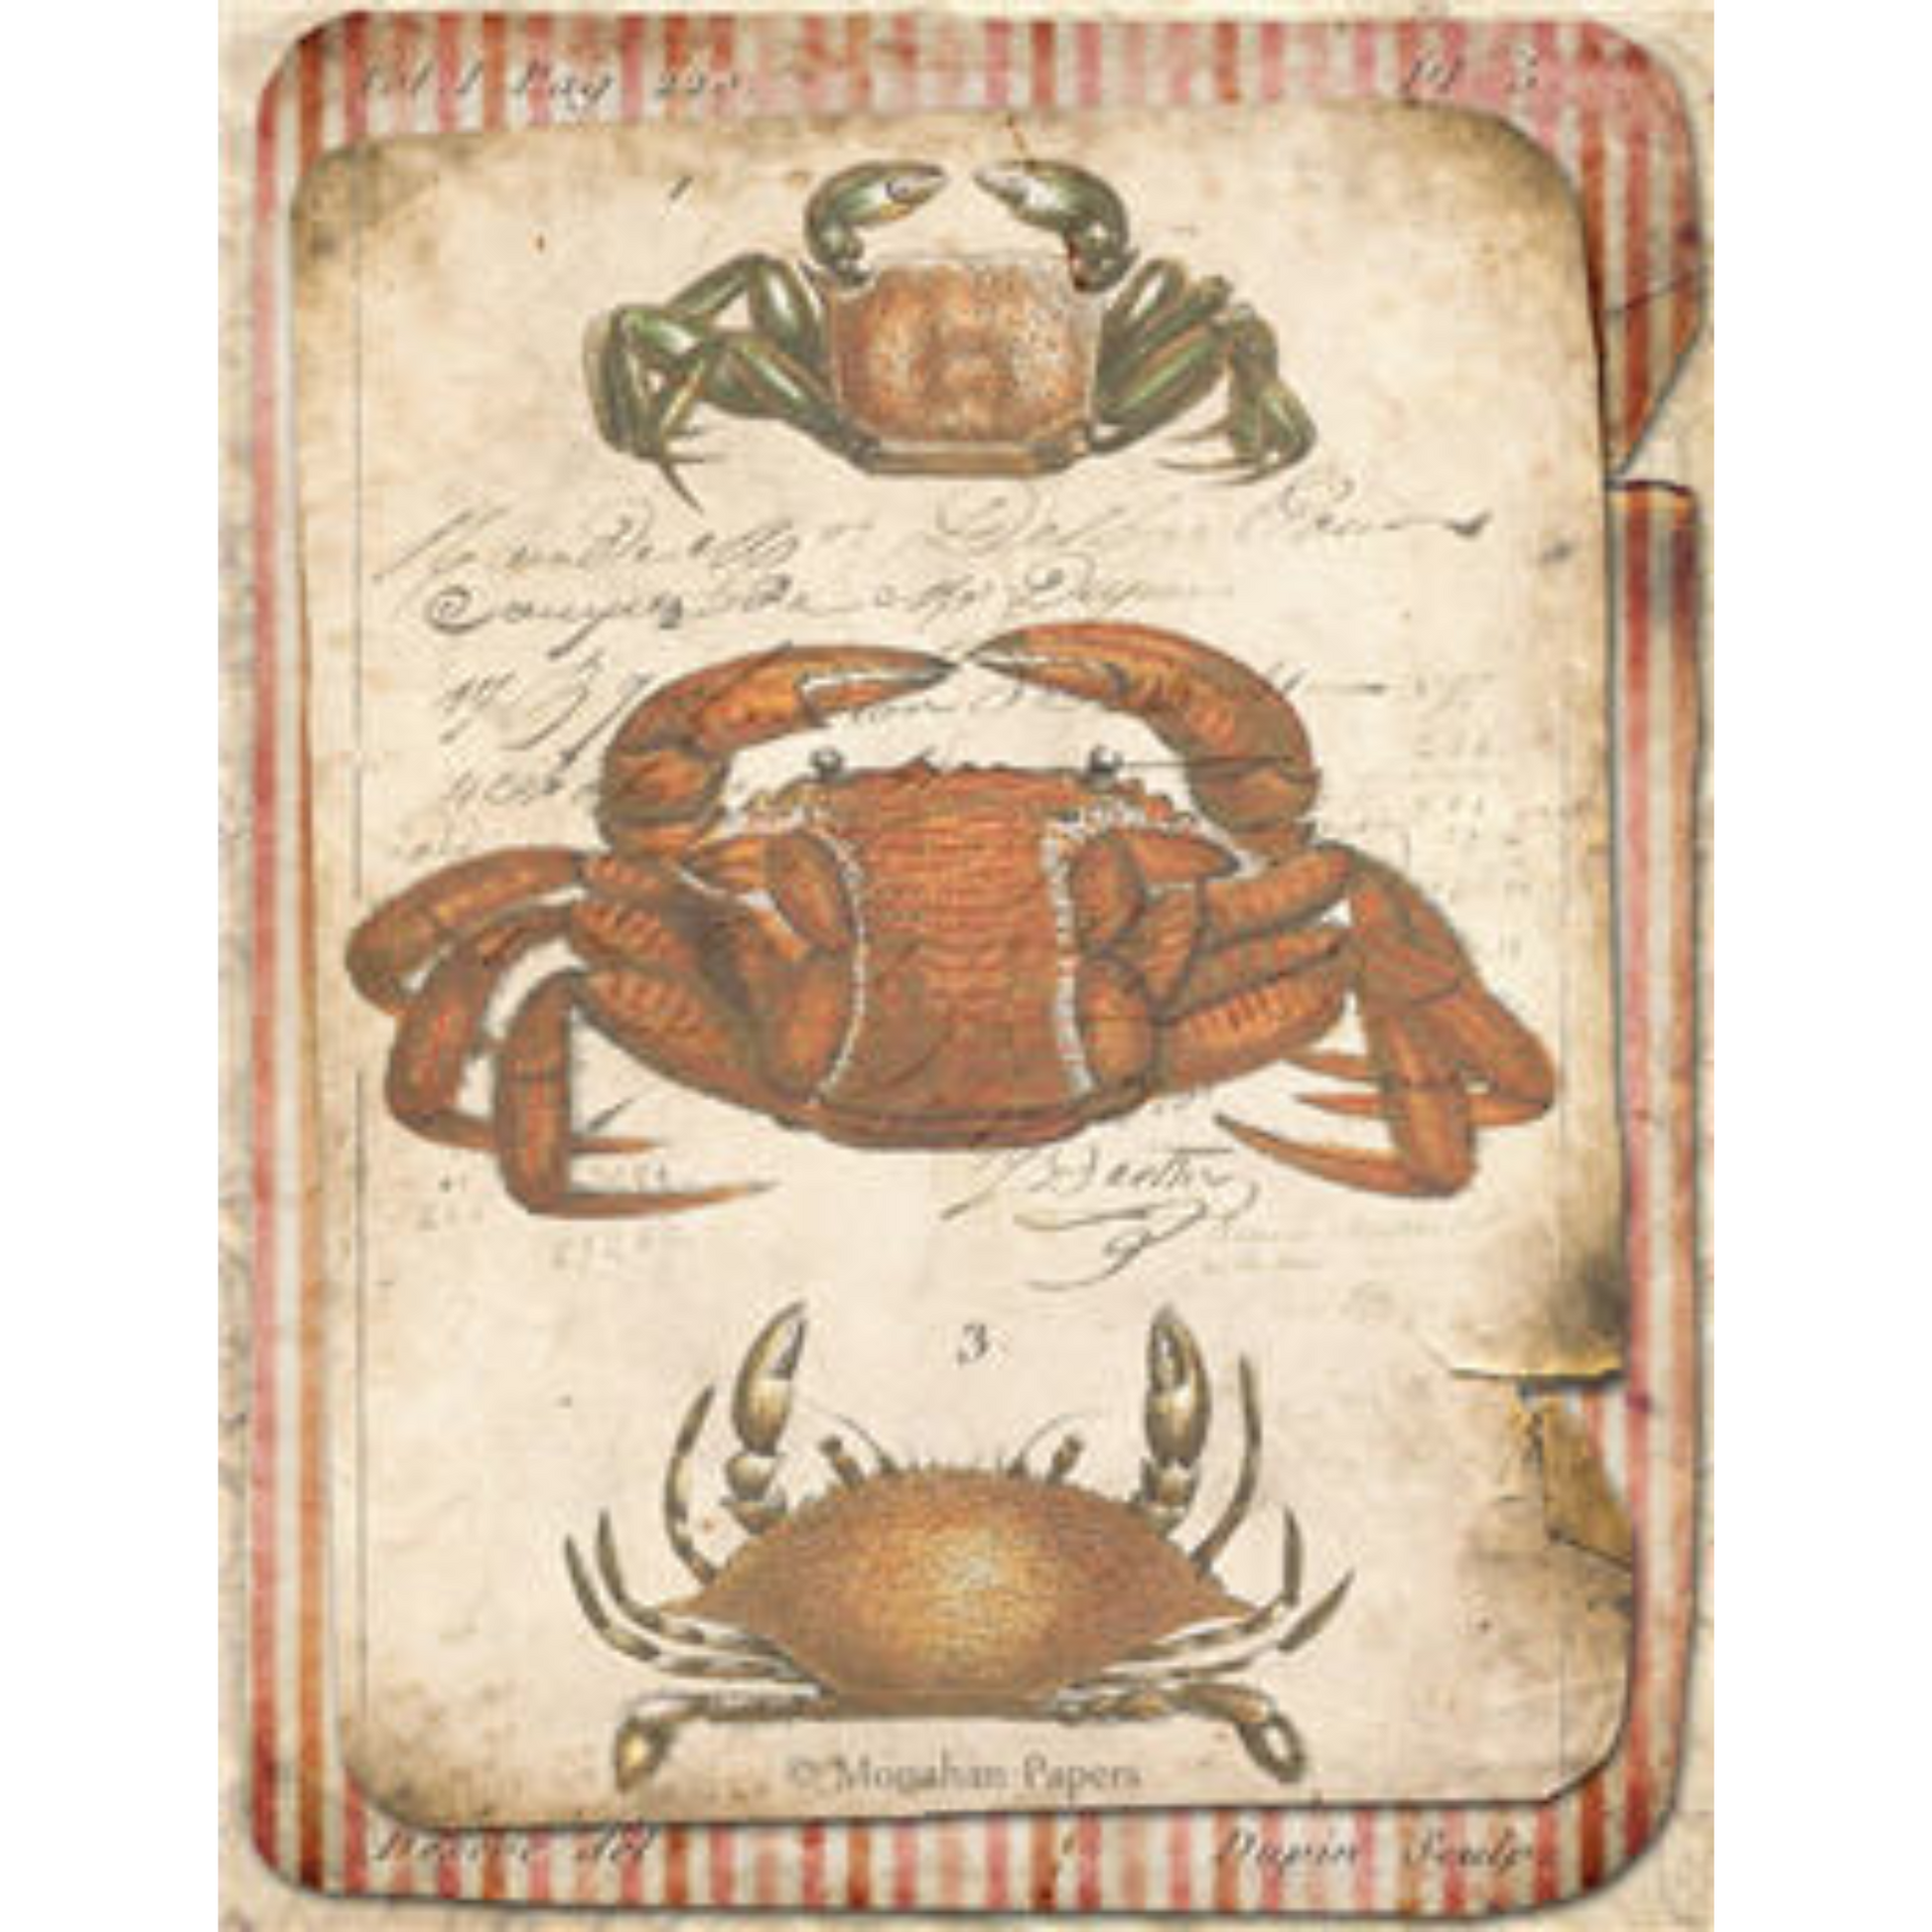 Red Crab Trio - X274- Decoupage Paper by Monahan Papers. 11" x 17" available at Milton's Daughter